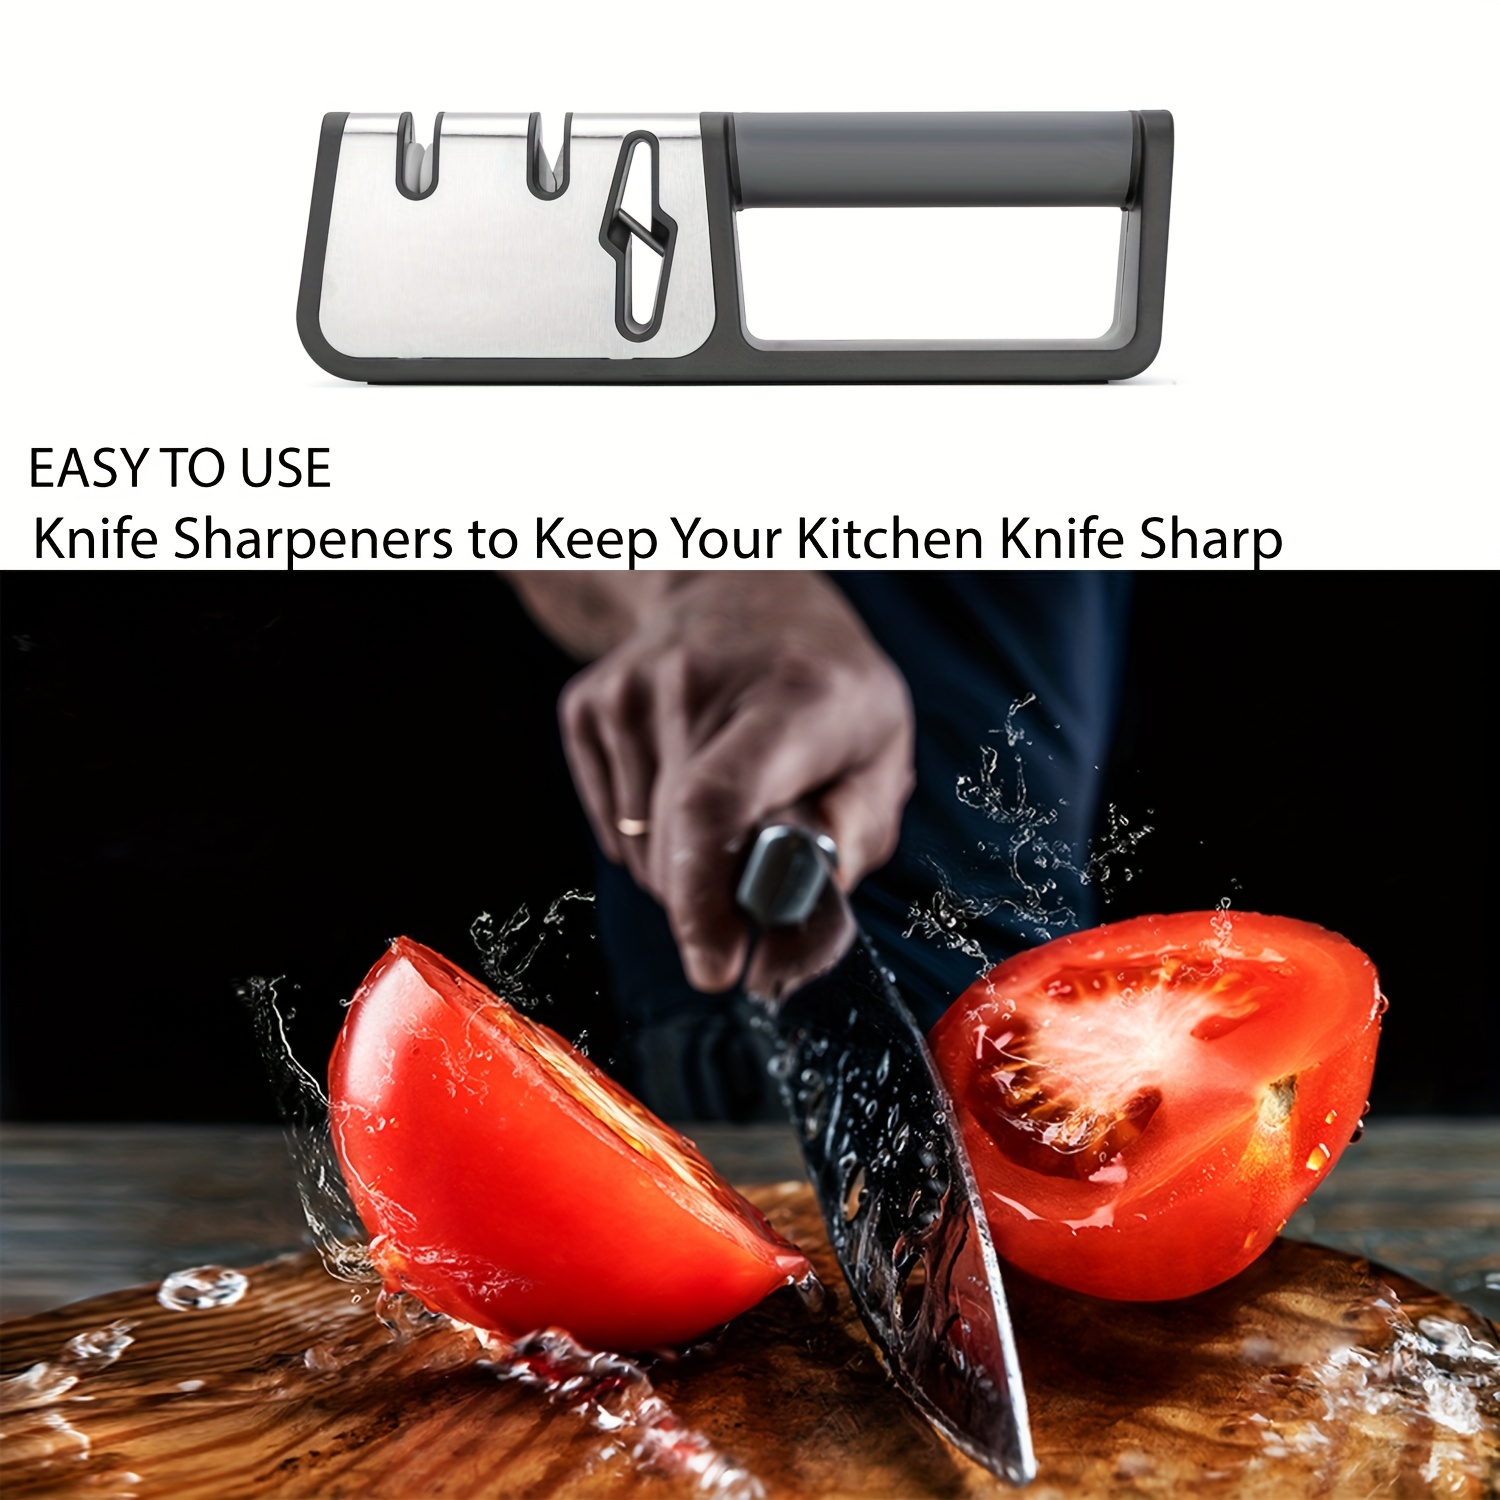 Get your chef knives razor-sharp with this $70 pro sharpener